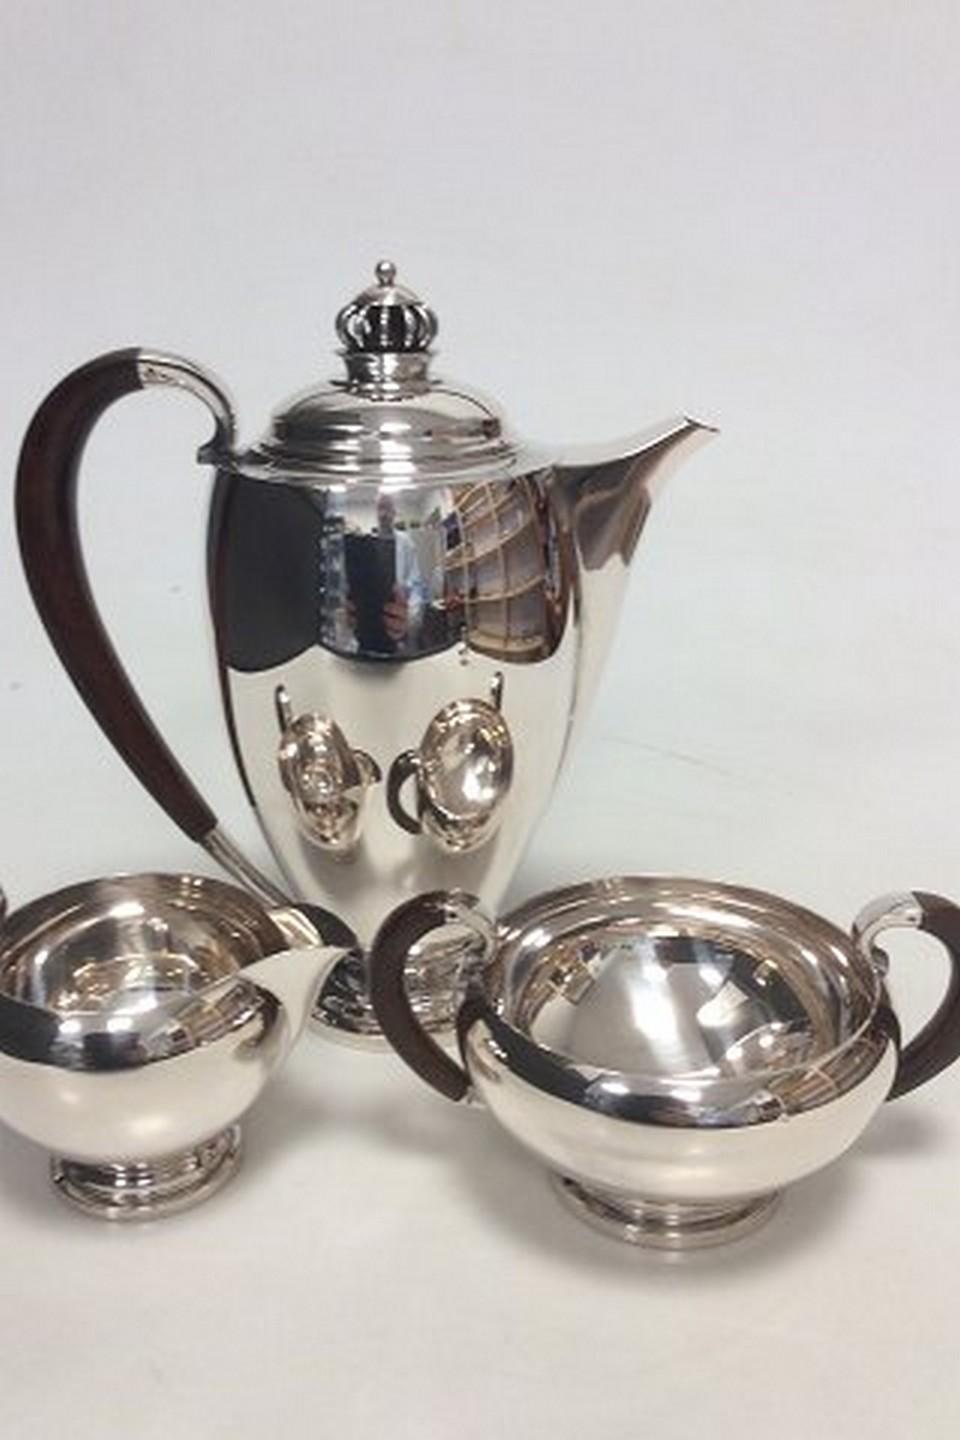 Theodor Sabroe Art Deco Danish silver coffee set with pot, creamer and sugar bowl from 1942.

Measures 23cm high

Weight for all is 866 grams / 30.50 oz.
Item no.: 436833.